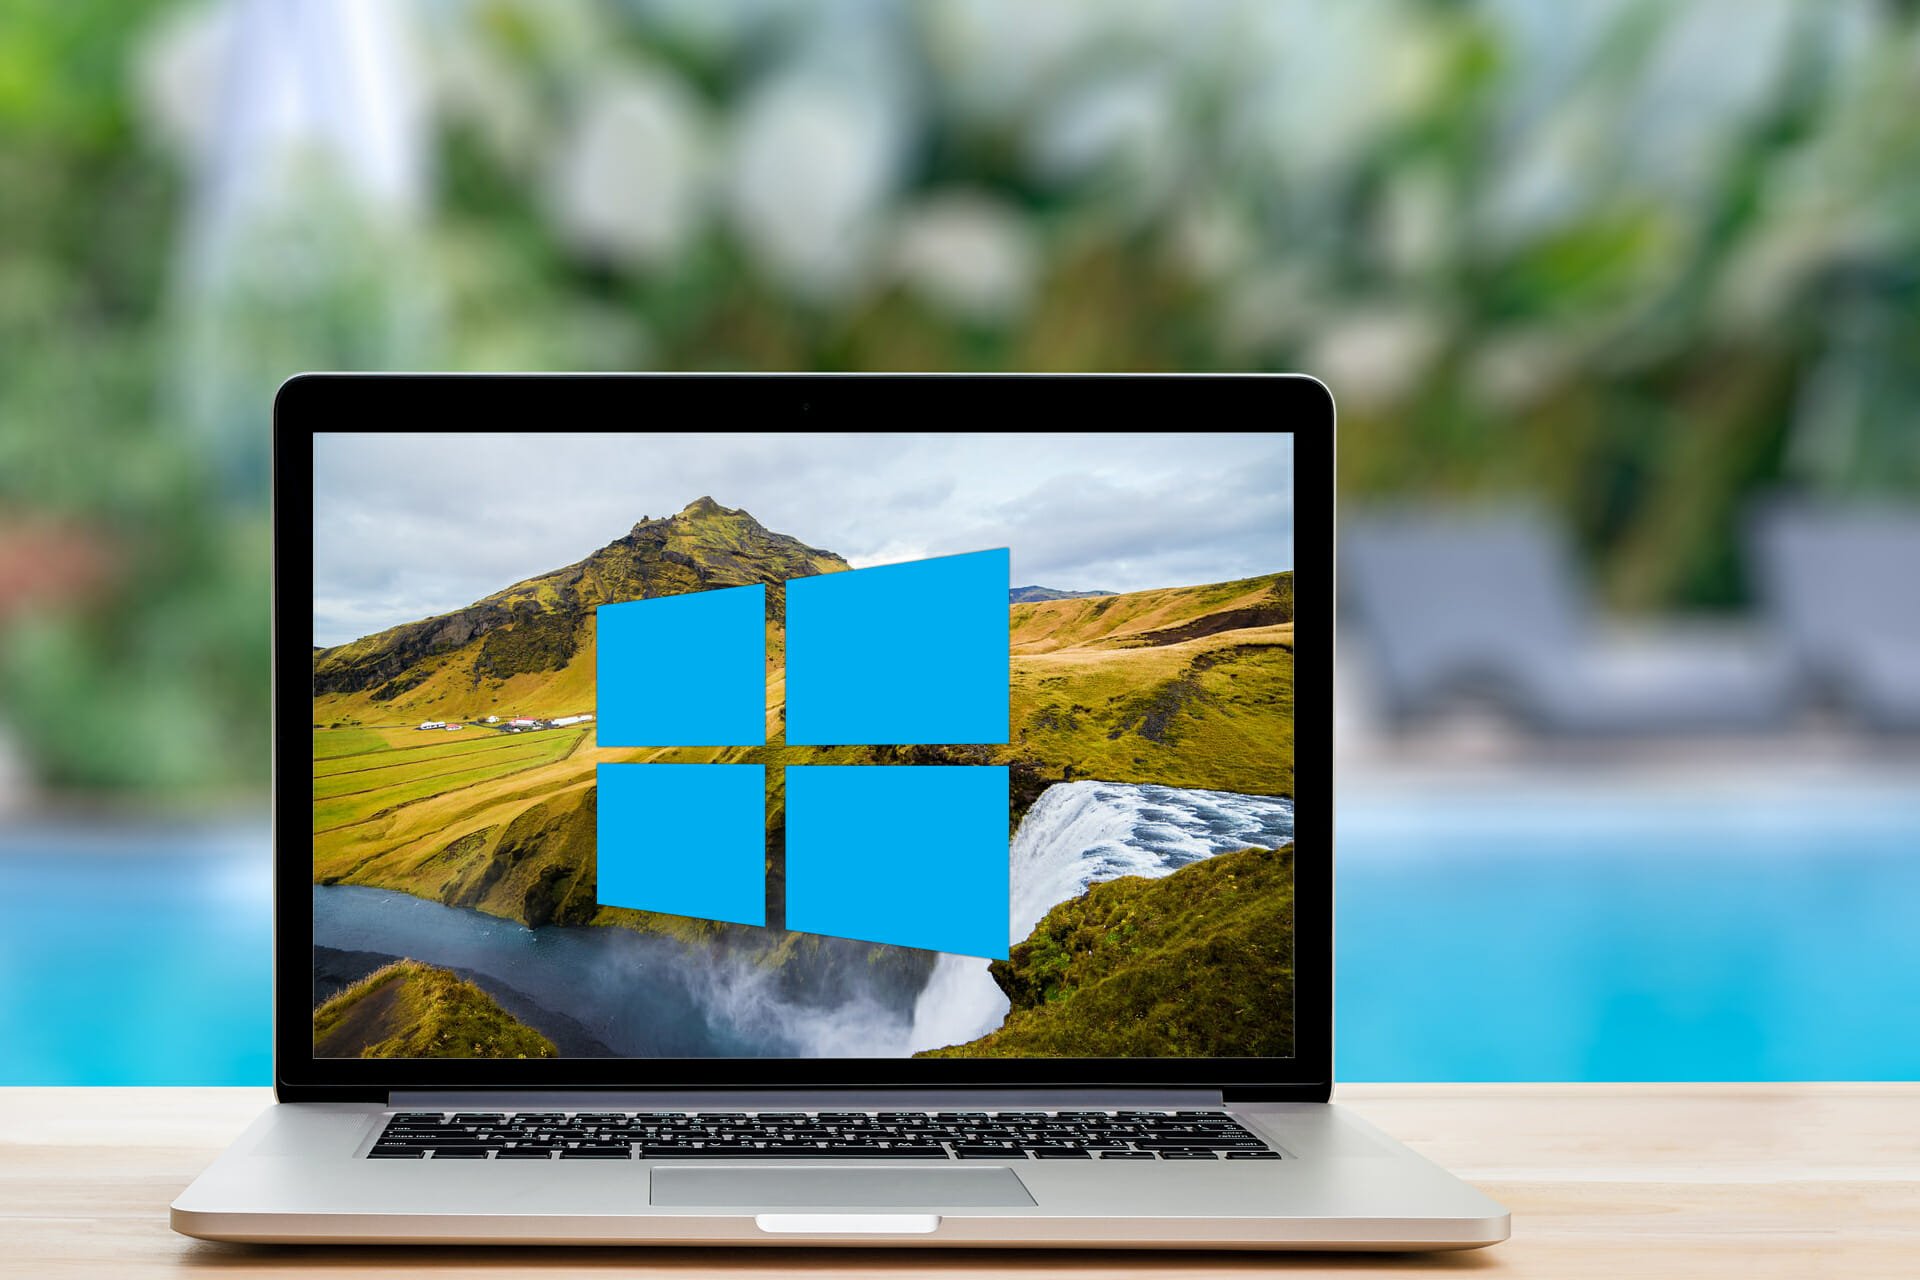 No more support for Windows 10